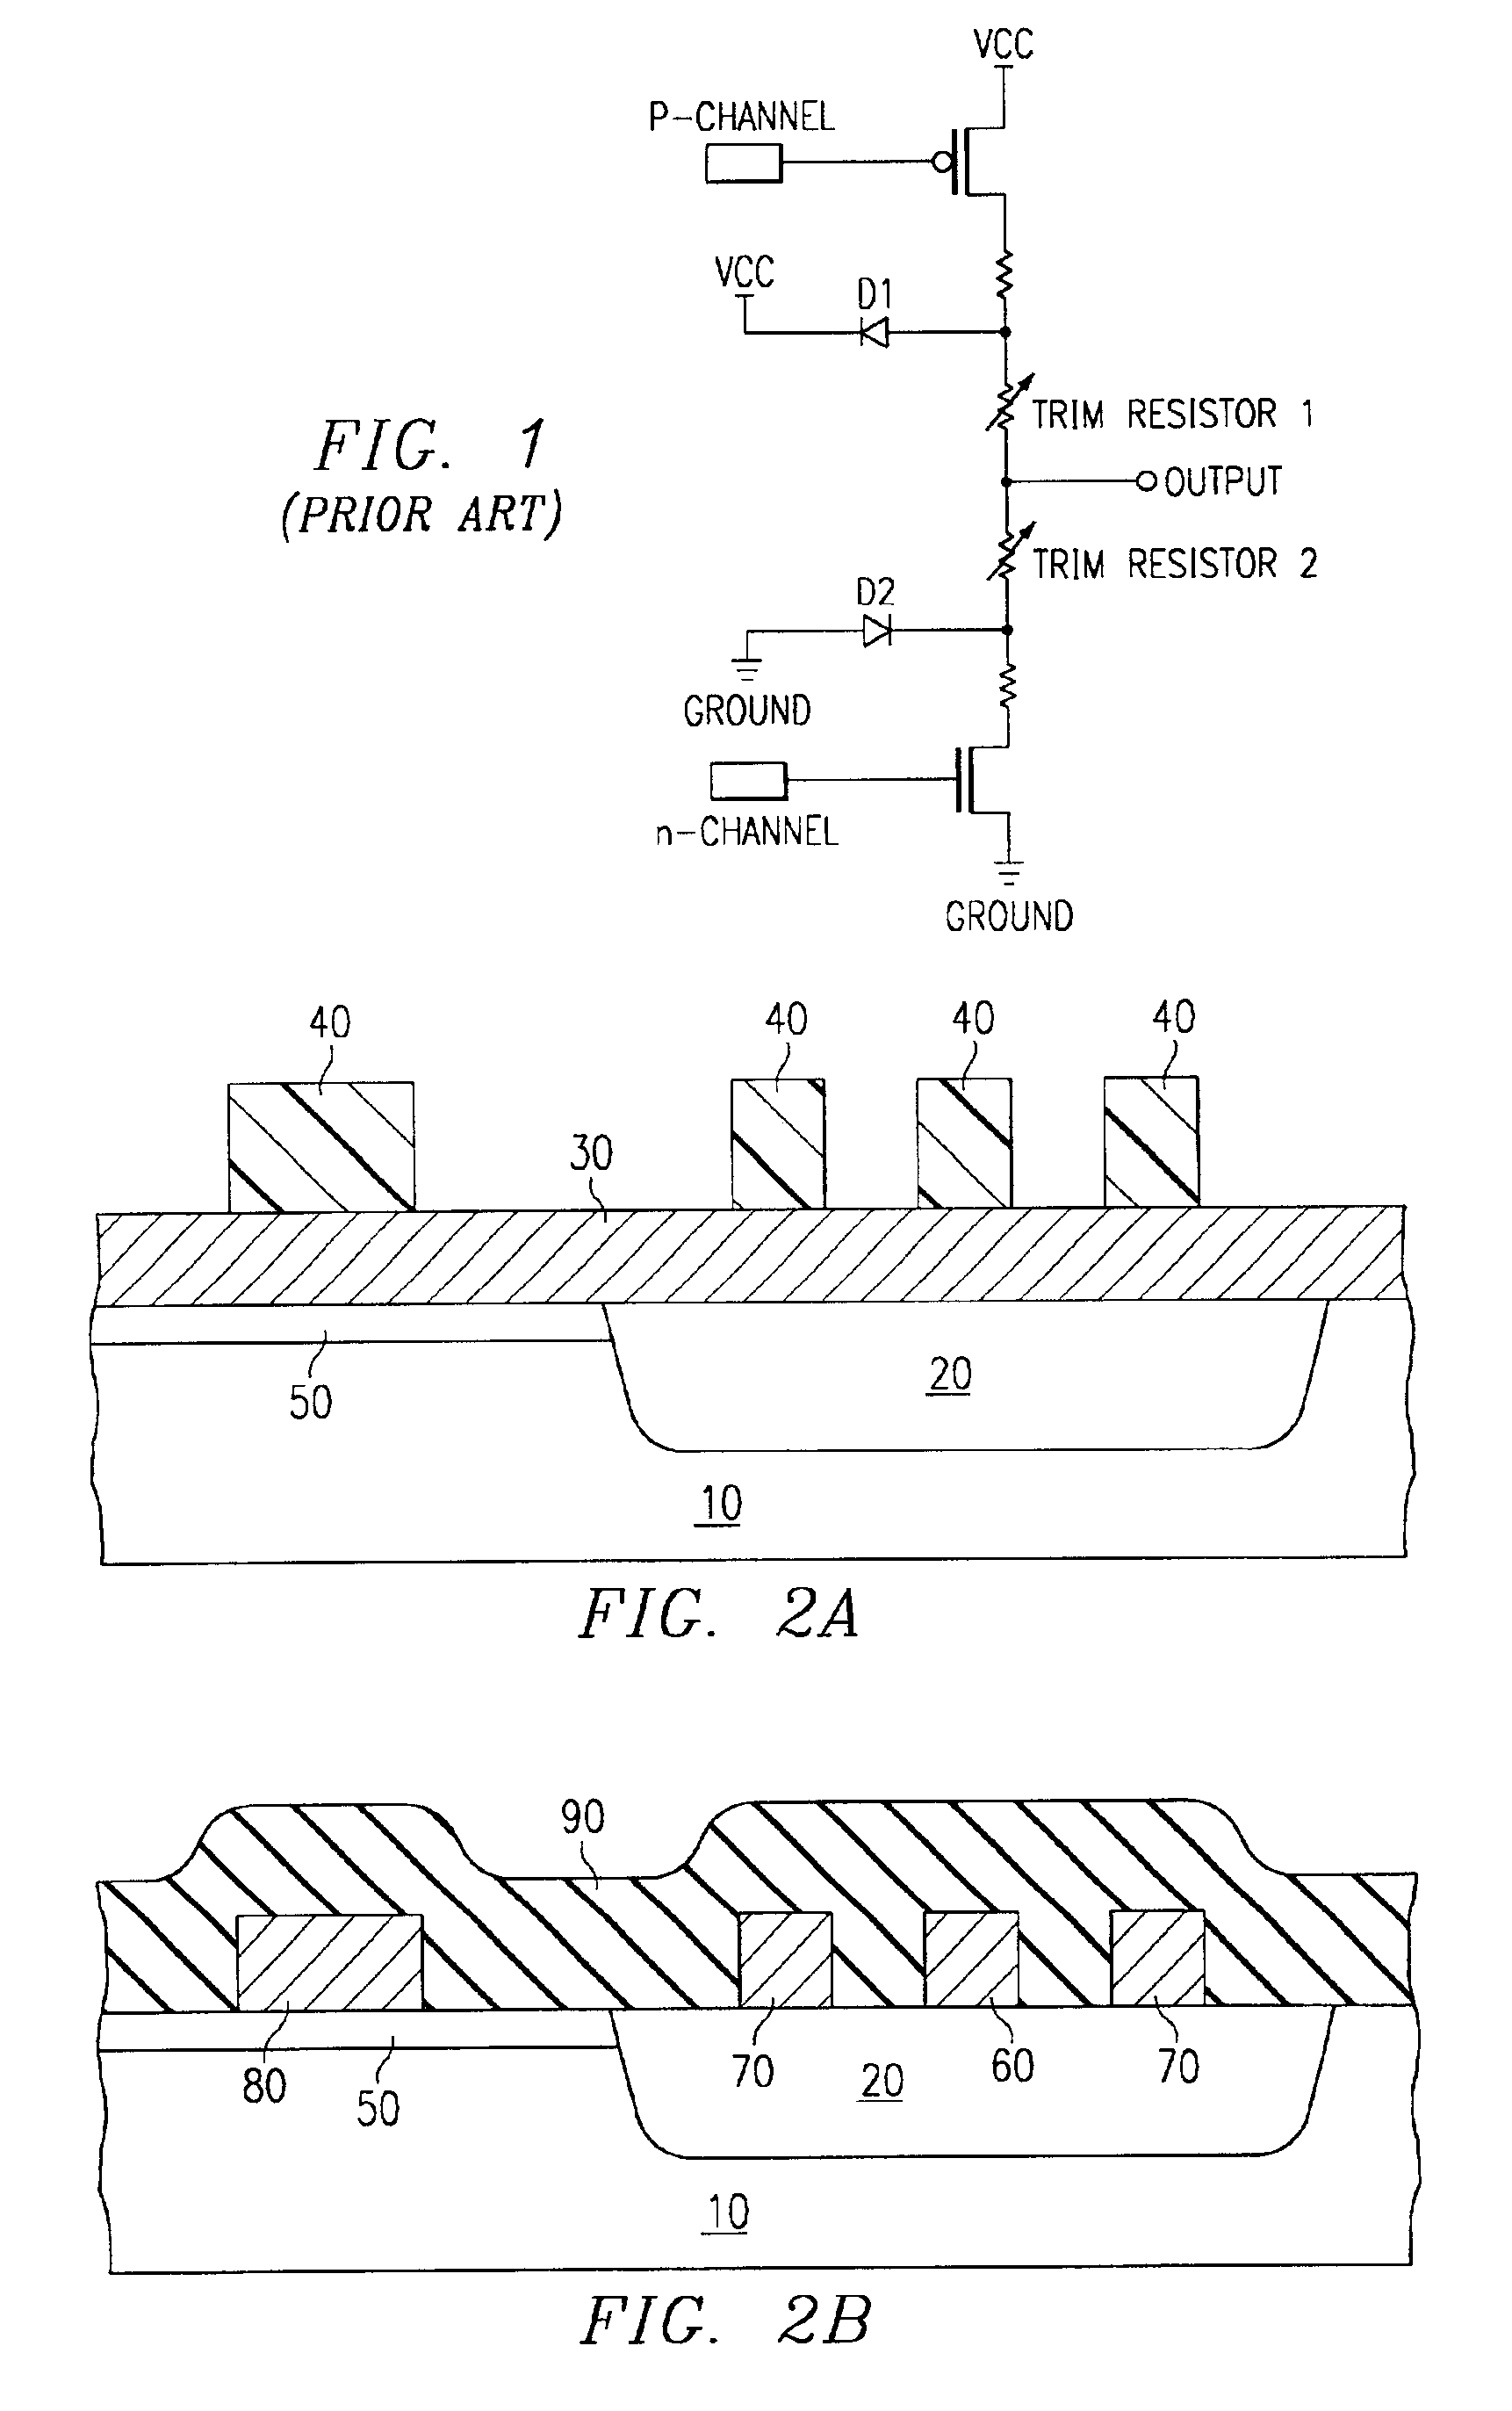 On chip heating for electrical trimming of polysilicon and polysilicon-silicon-germanium resistors and electrically programmable fuses for integrated circuits